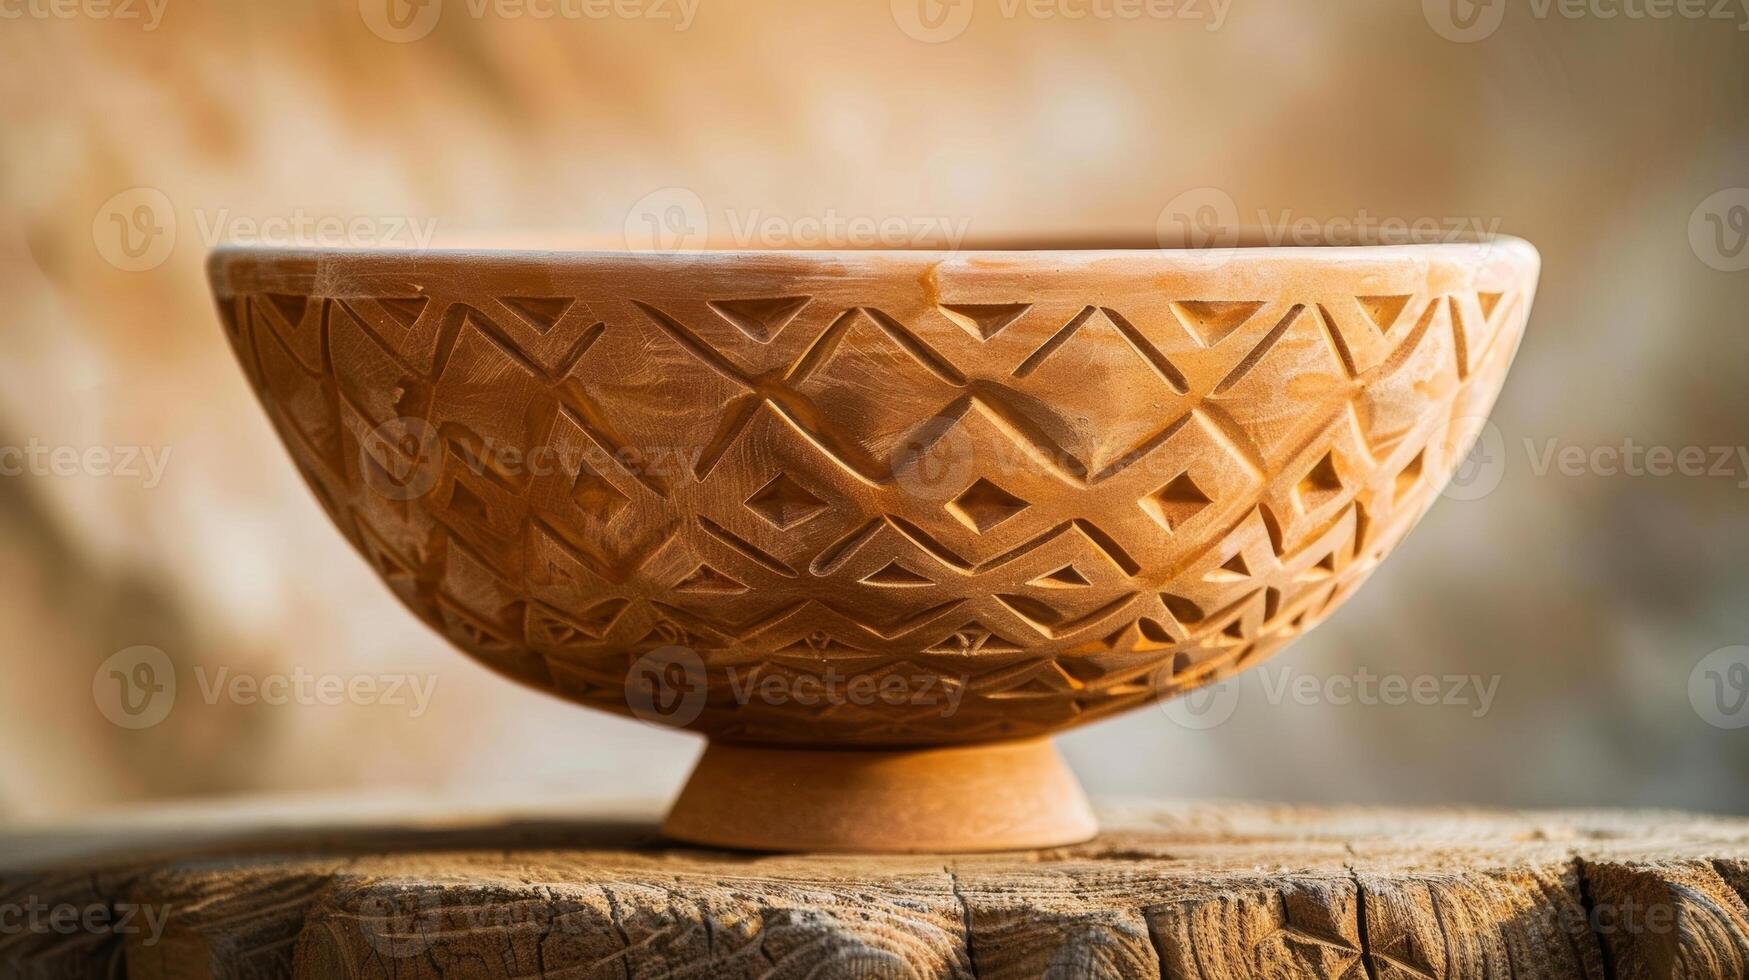 A photo of a finished embossed clay bowl with an intricate geometric design covering its surface emphasizing the ornamental and decorative appeal of embossing techniques.